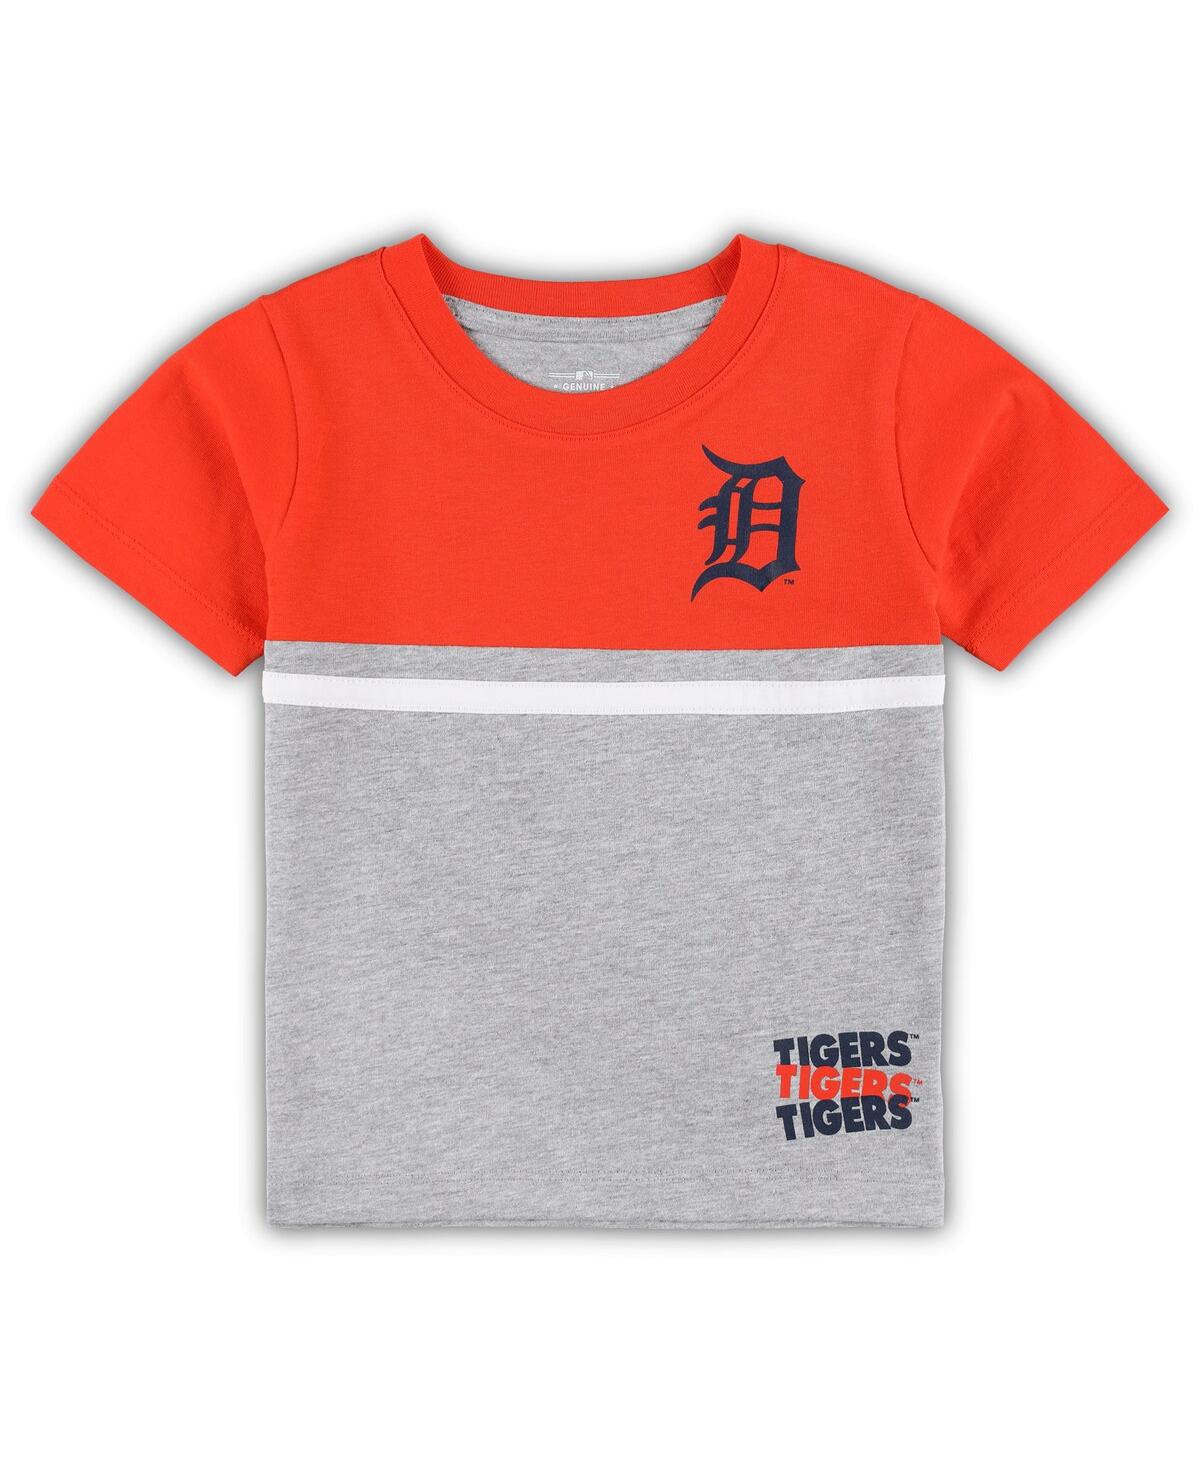 Outerstuff Toddler Boys and Girls Navy, Orange Detroit Tigers